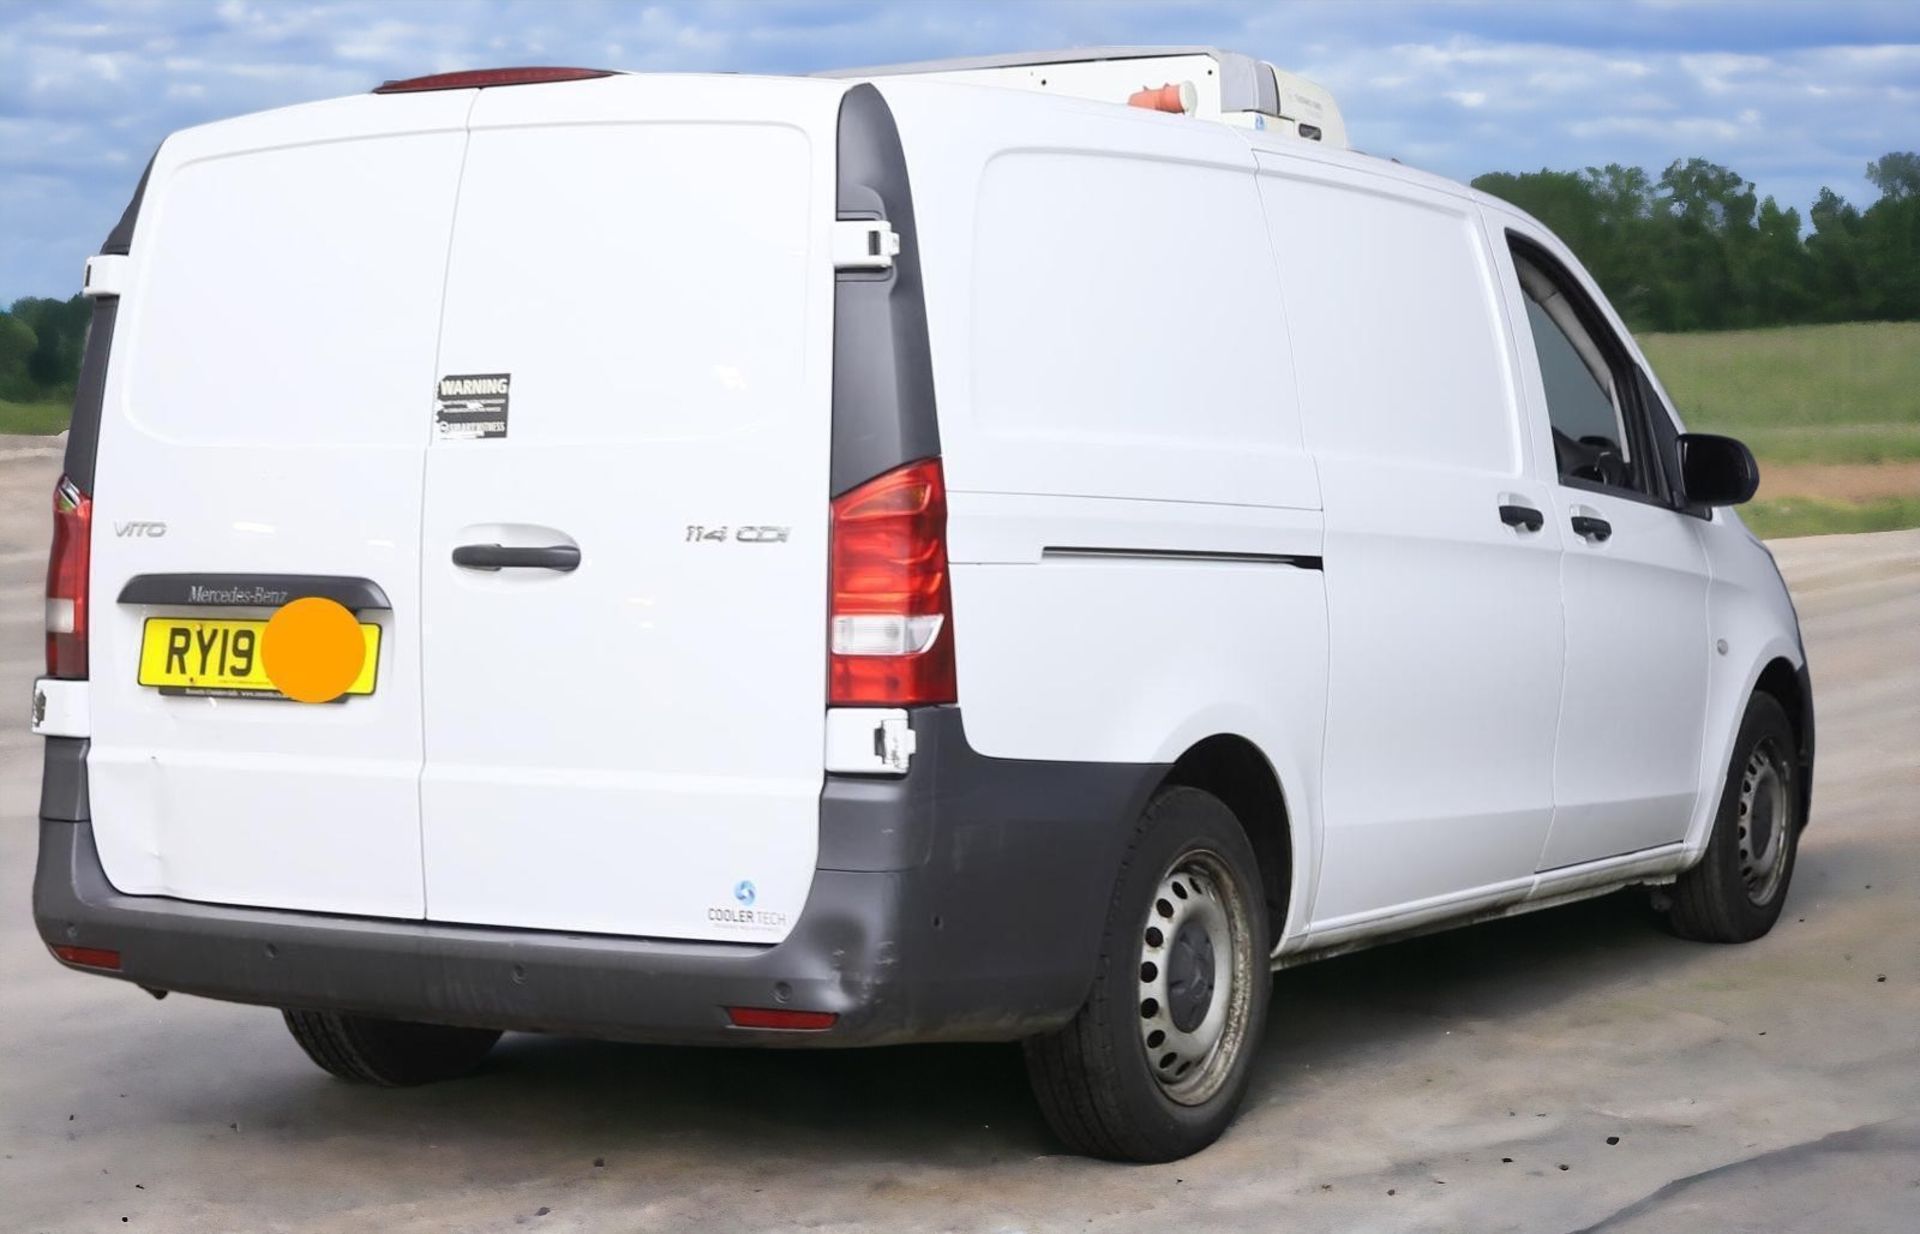 2019 MERCEDES BENZ VITO LWB FRIDGE VAN 114 CDI - YOUR RELIABLE REFRIGERATED SOLUTION - Image 5 of 12